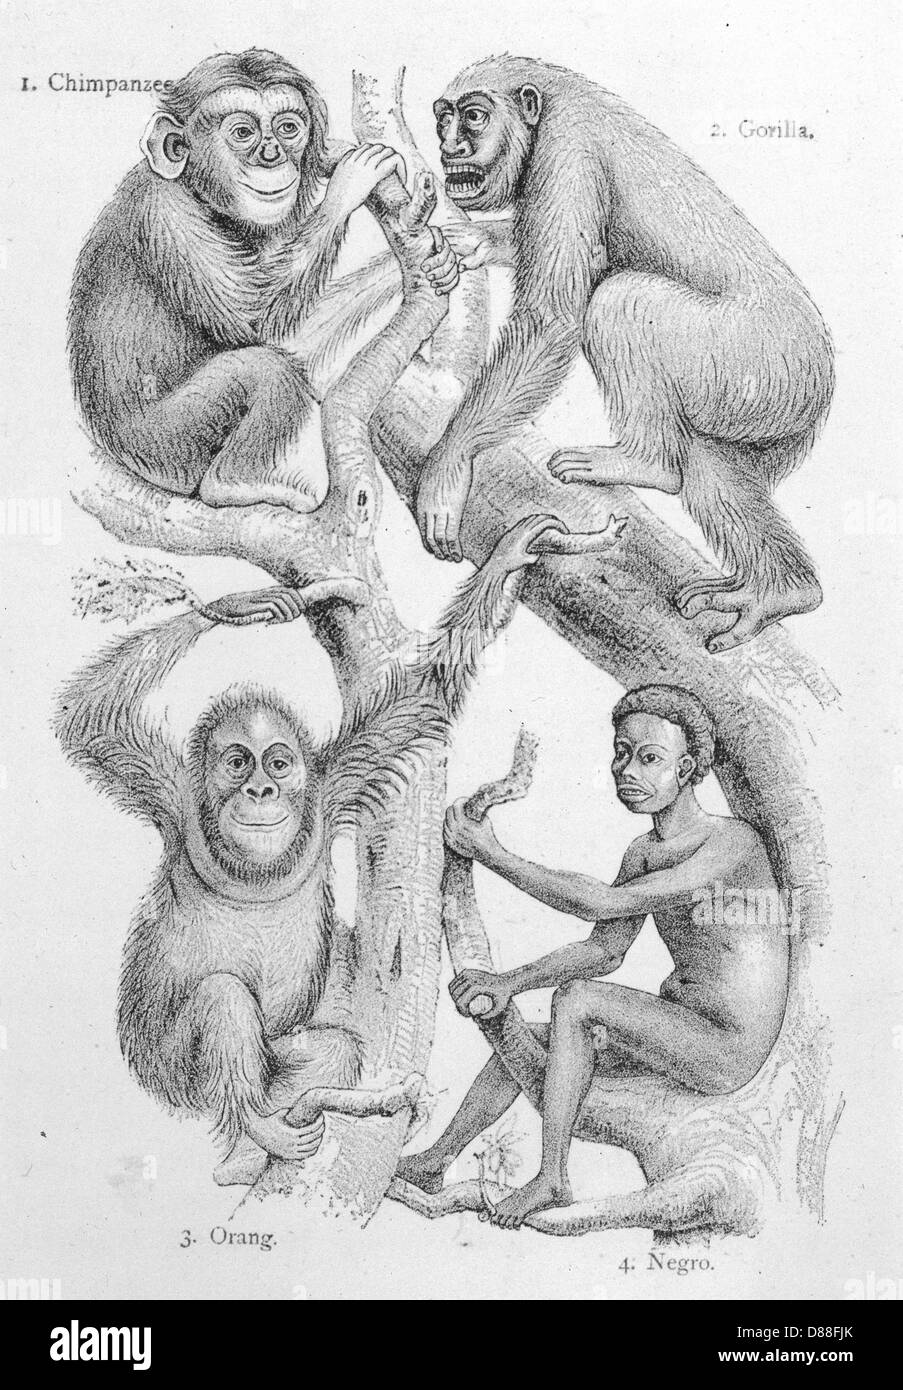 Man and Other Primates Stock Photo